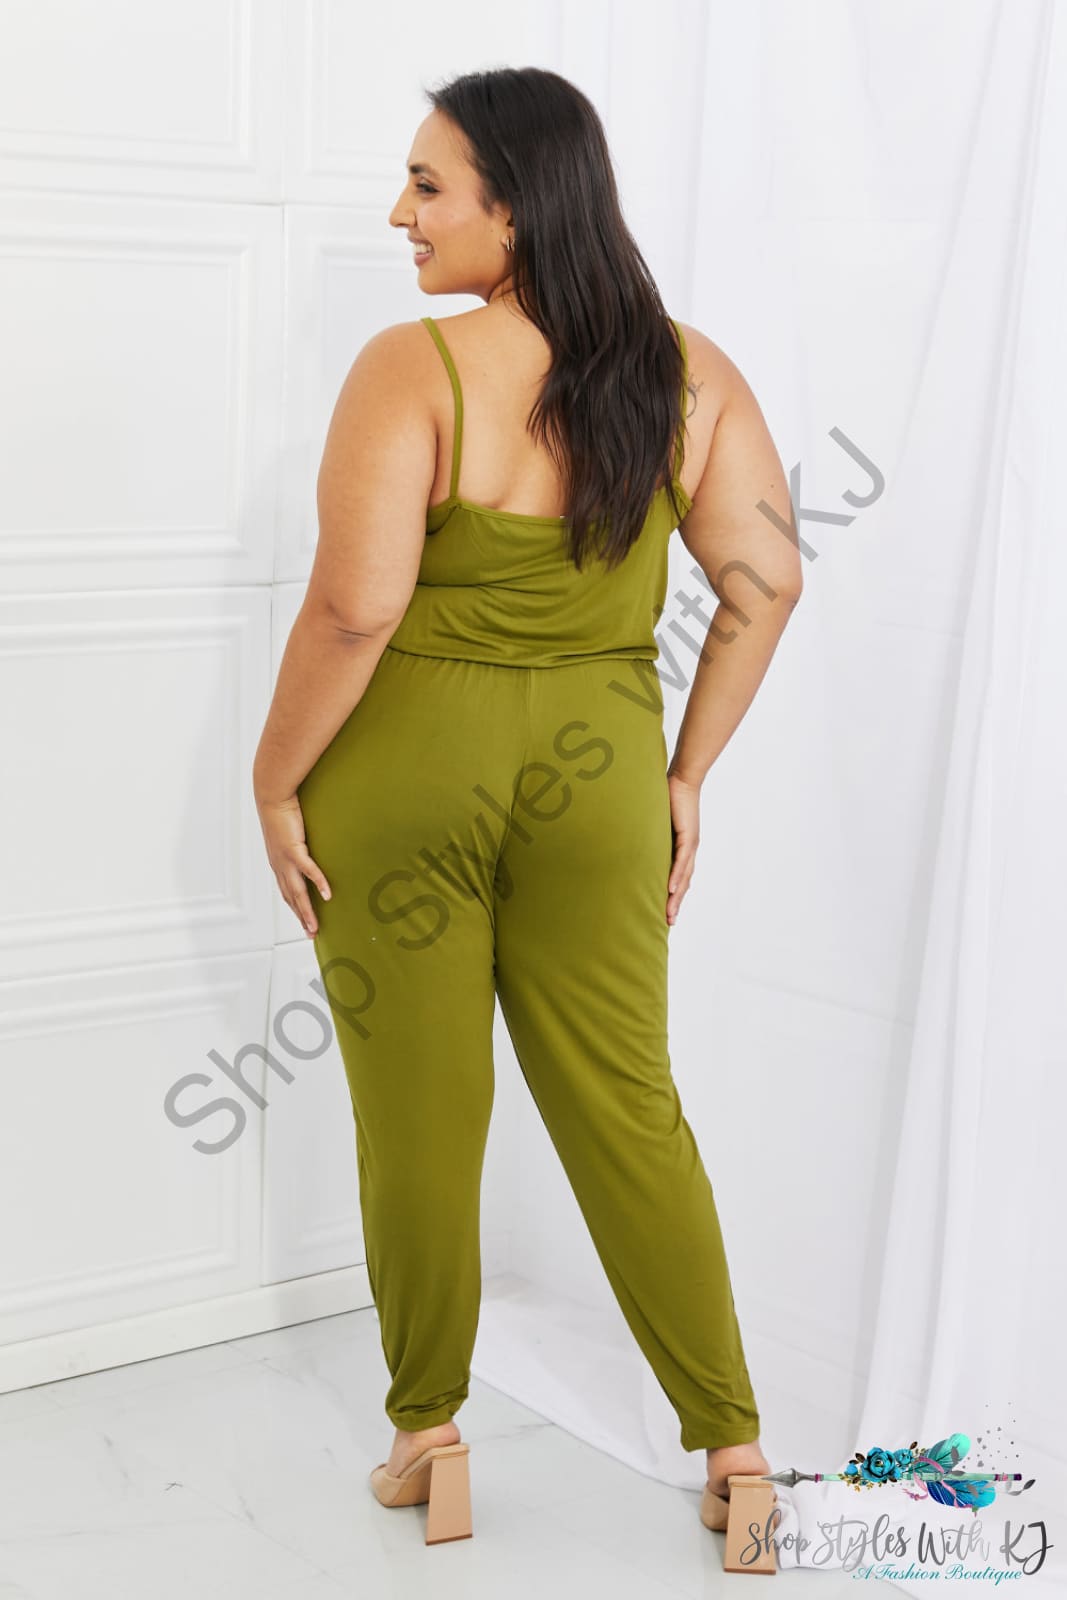 Comfy Casual Solid Elastic Waistband Jumpsuit In Chartreuse Jumpsuits & Rompers